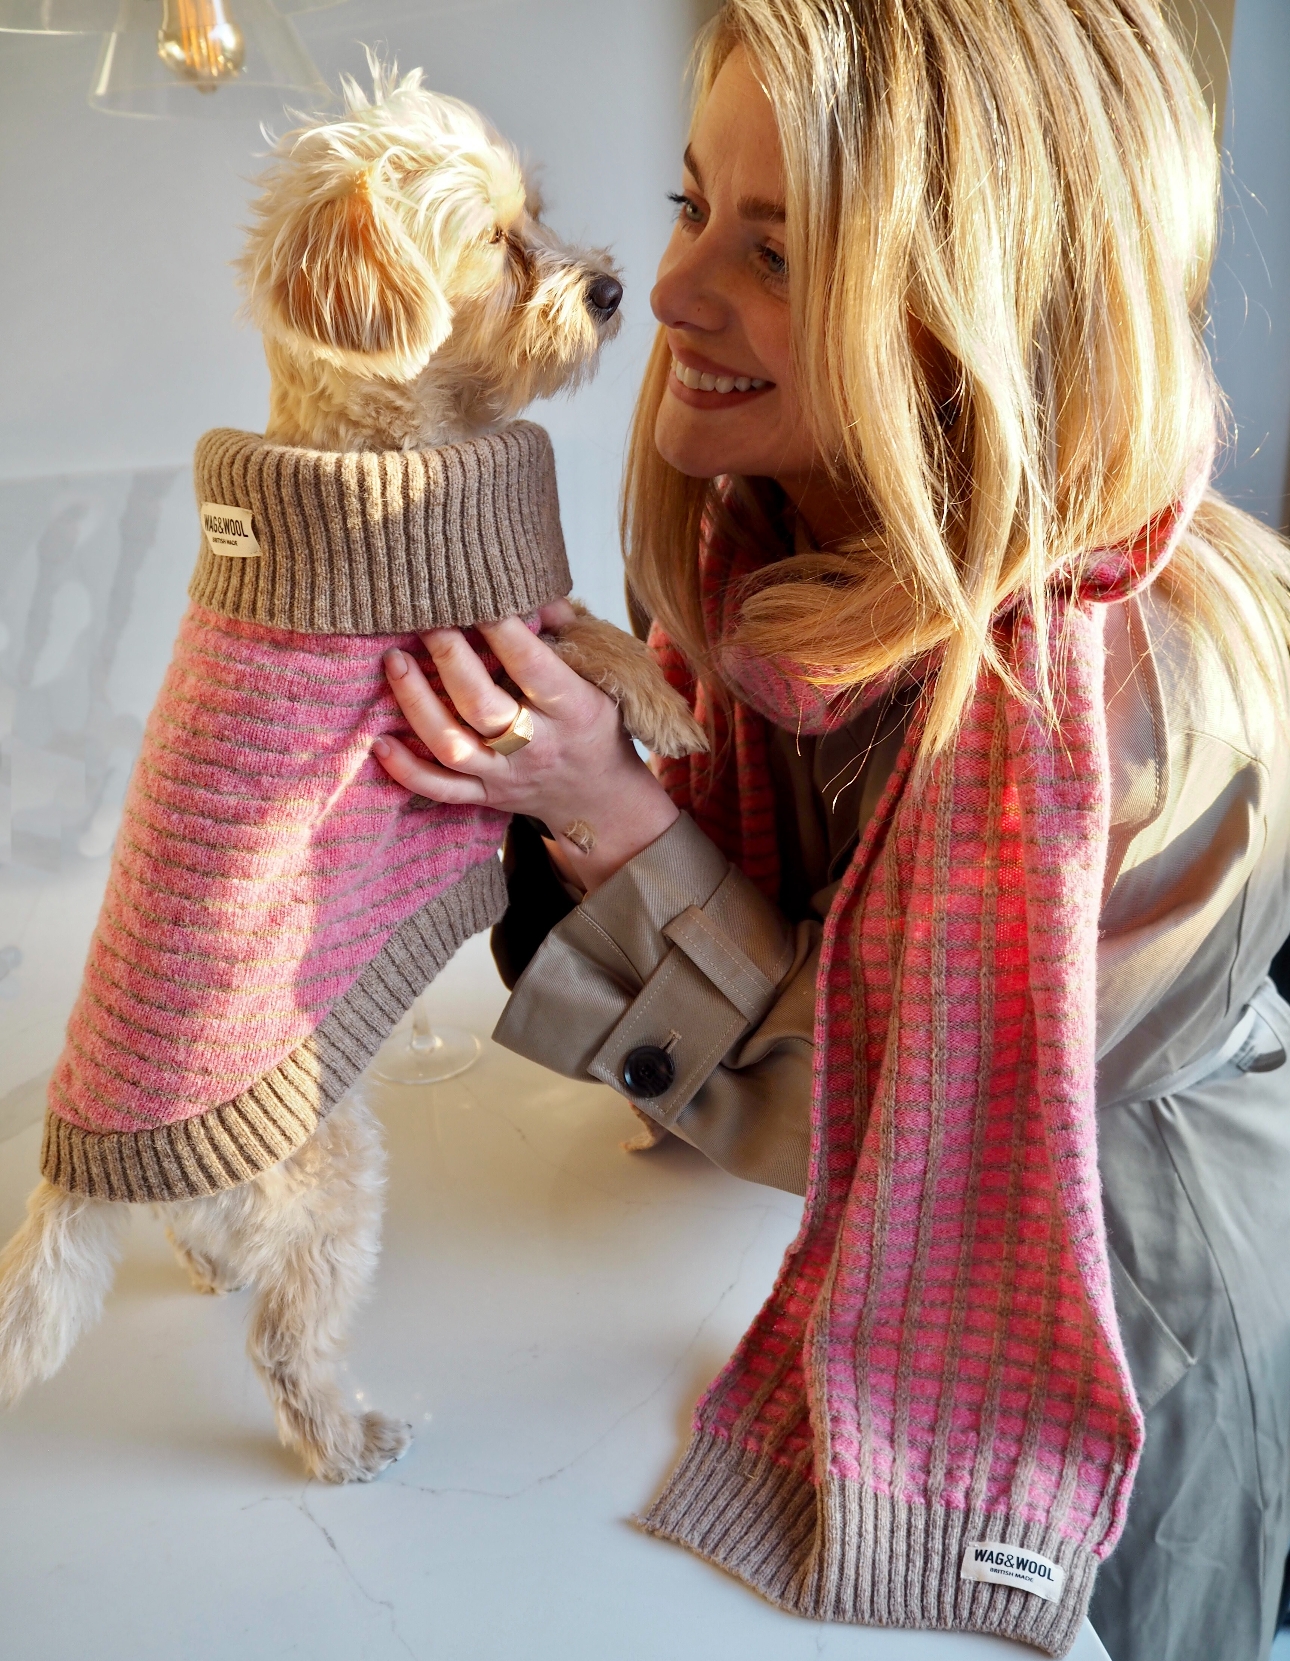 blonde woman holding dog in matching pink dog suit and scarf